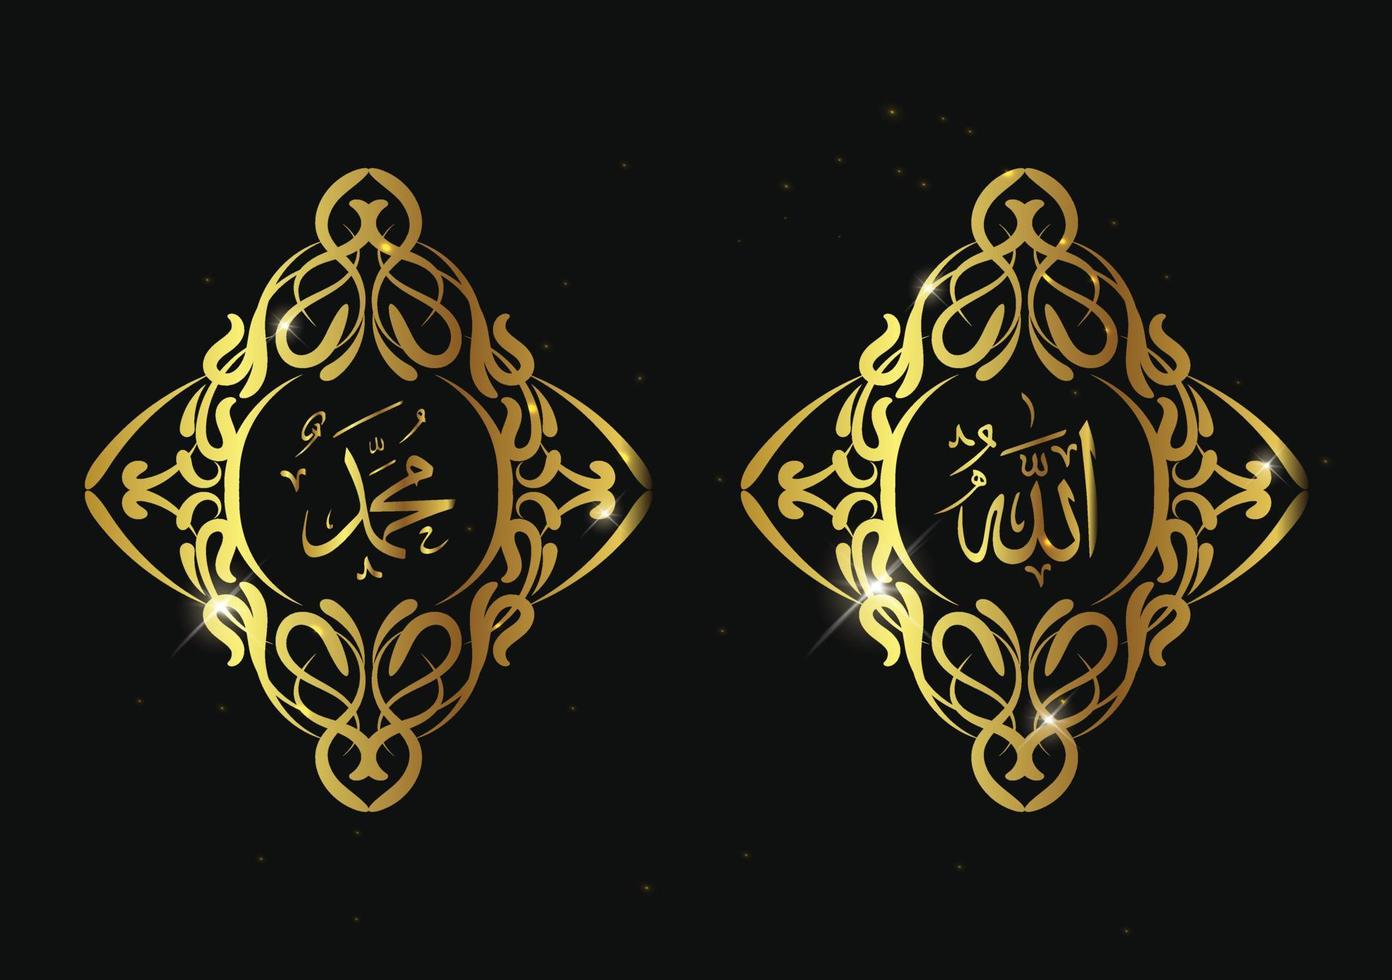 allah muhammad arabic calligraphy with retro frame and gold color. Islamic arabic calligraphy for decoration, banner, template, card, layout. vector